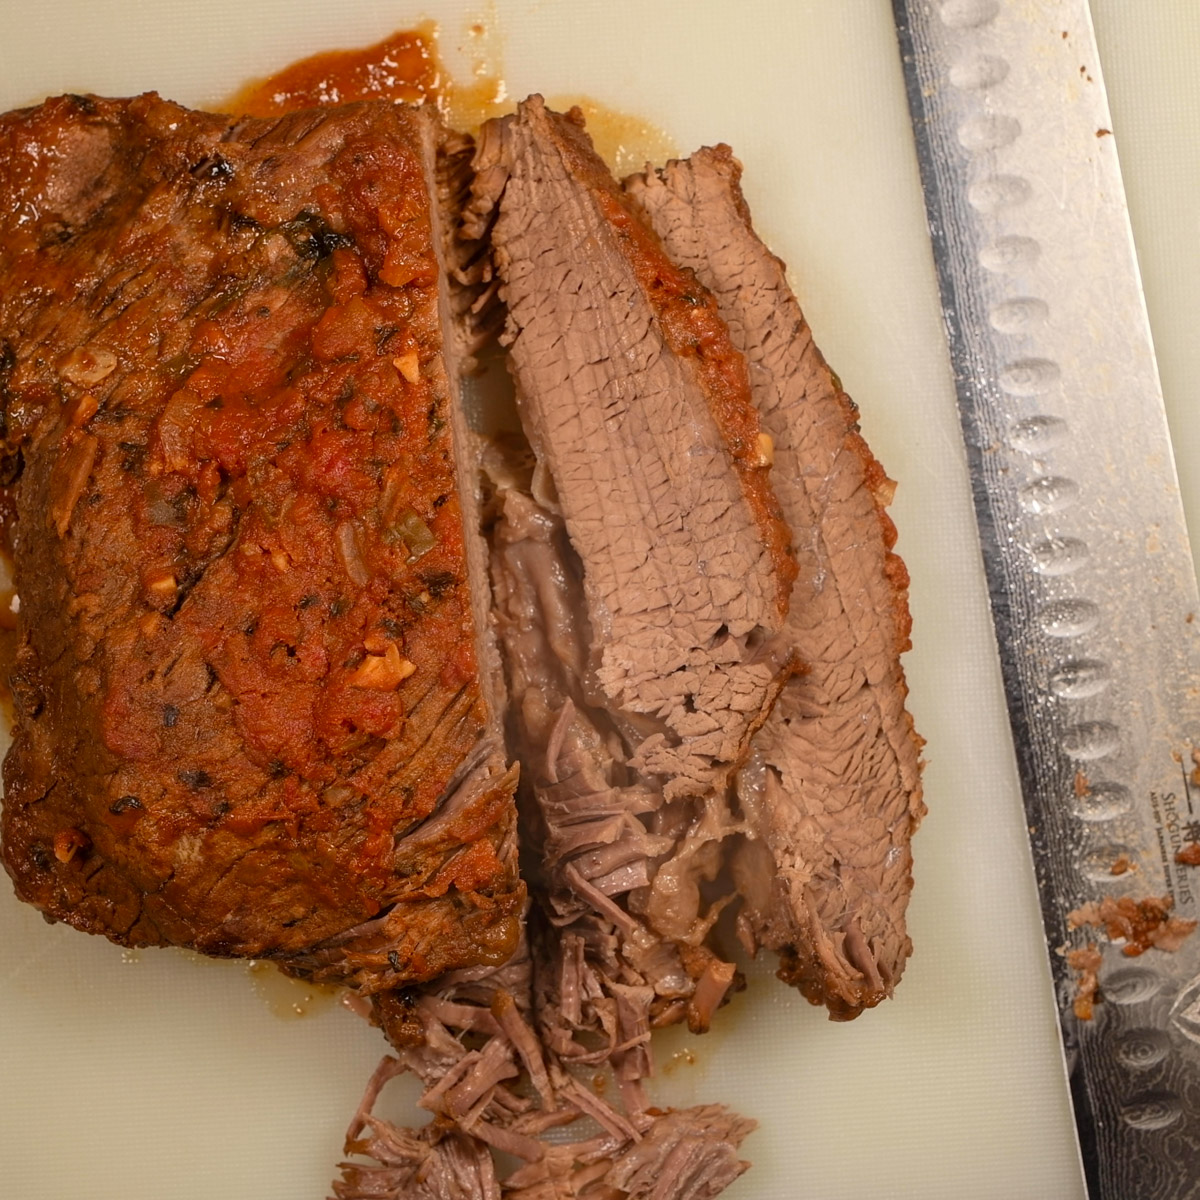 Cut the brisket into ¼" thick slices.